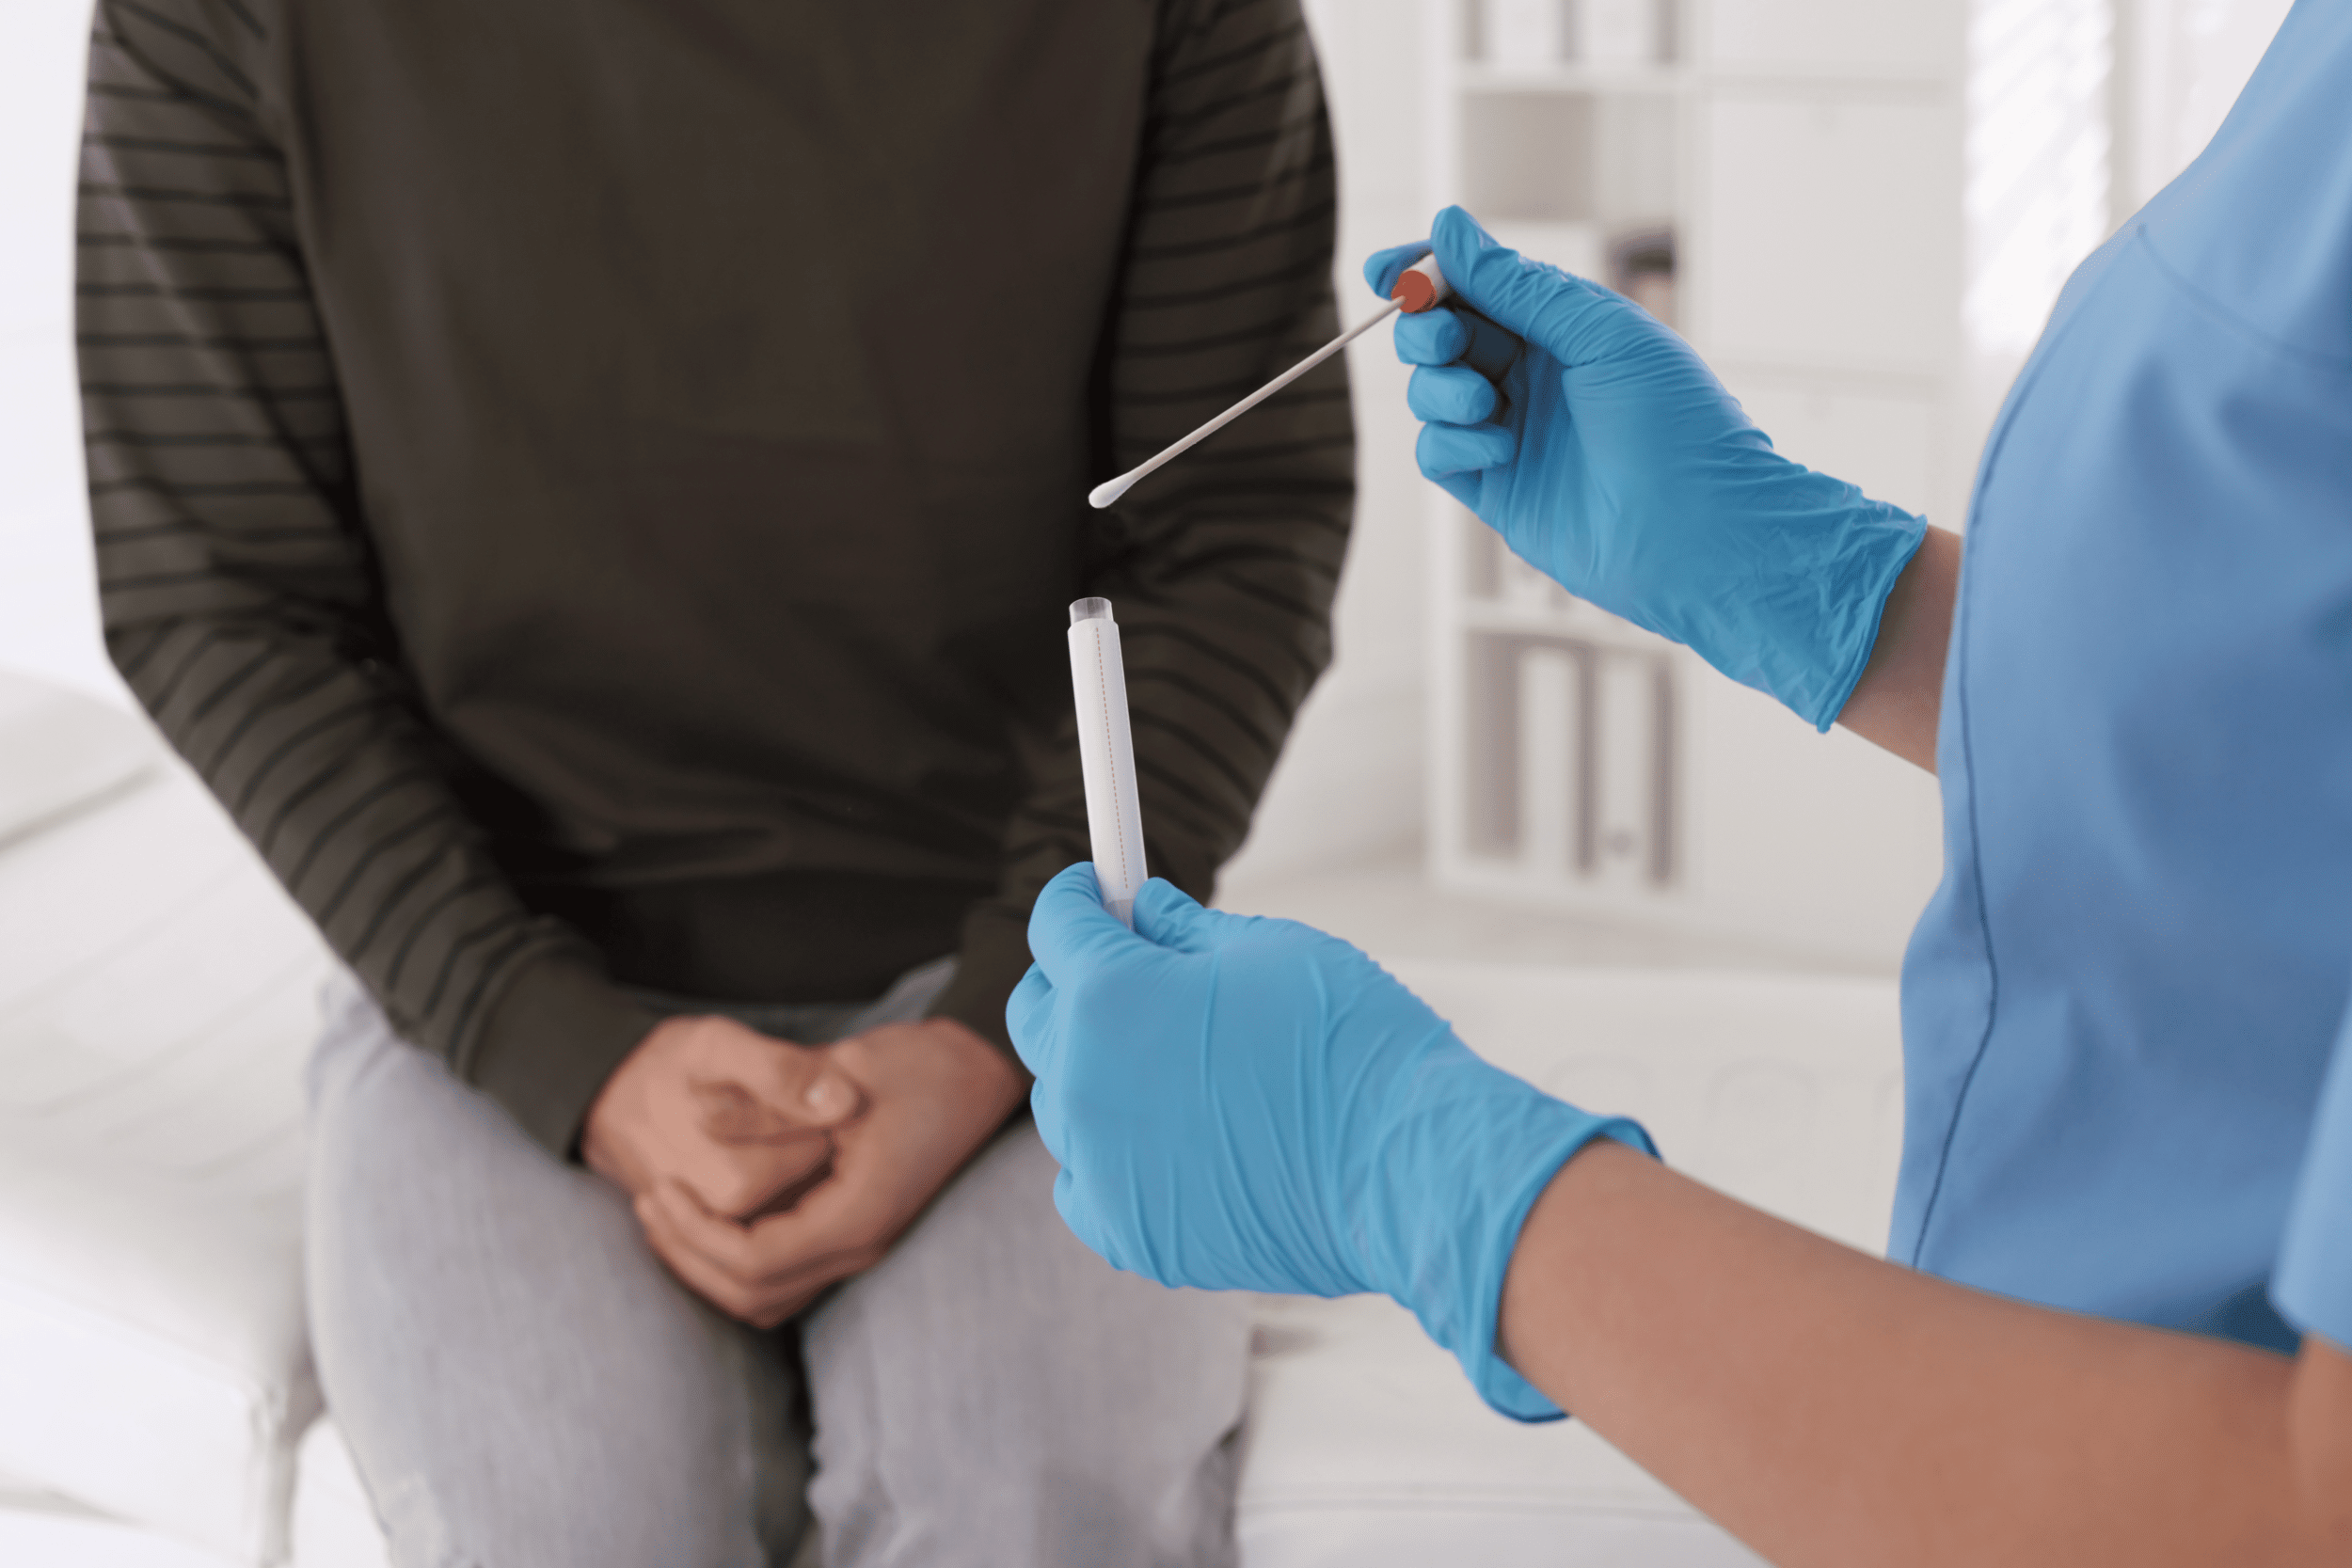 medical professional holding swab about to perform STD test